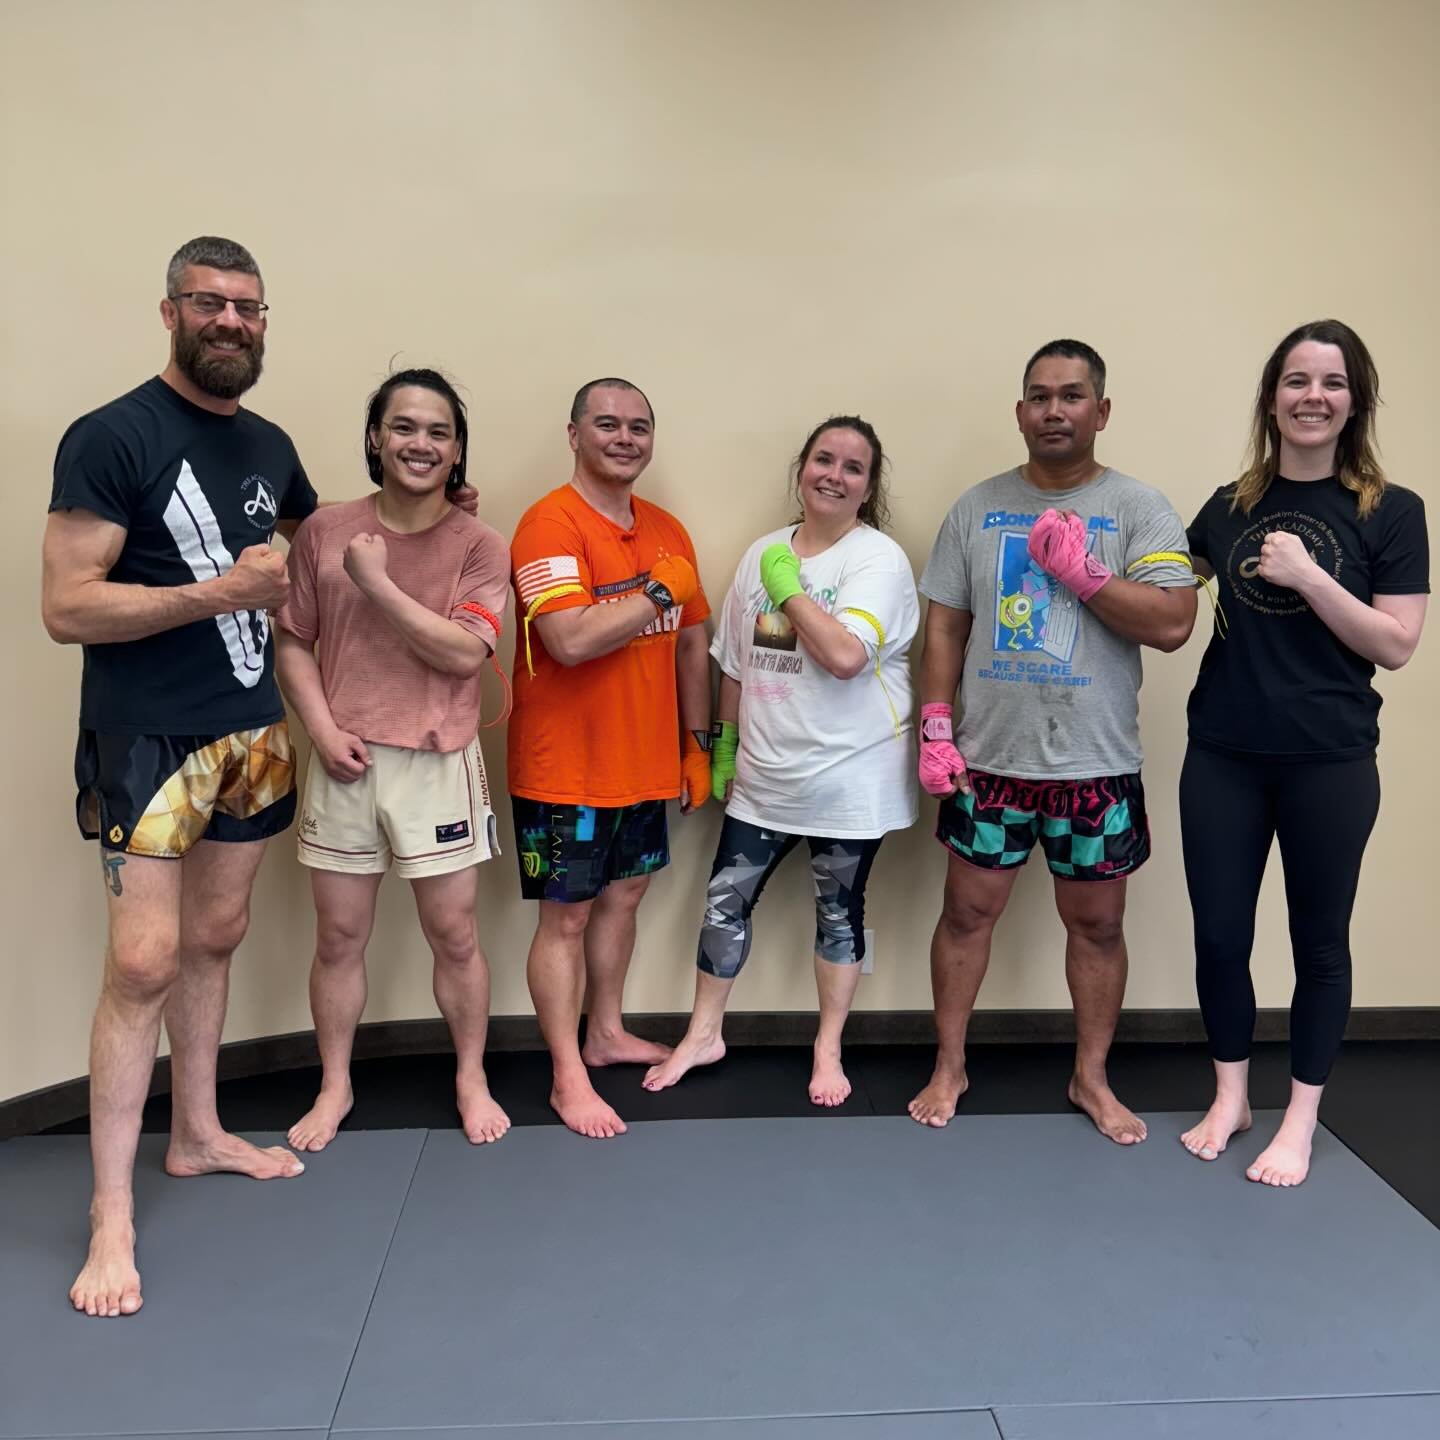 Congratulations to all of our students who achieved the next rank in Muay Thai!

#muaythai #muaythaifighter #muaythailife #muaythailifestyle #muaythaitraining #nextlevel #heart #dedication #passion #theacademy #thaipads #teamwork #burnsville